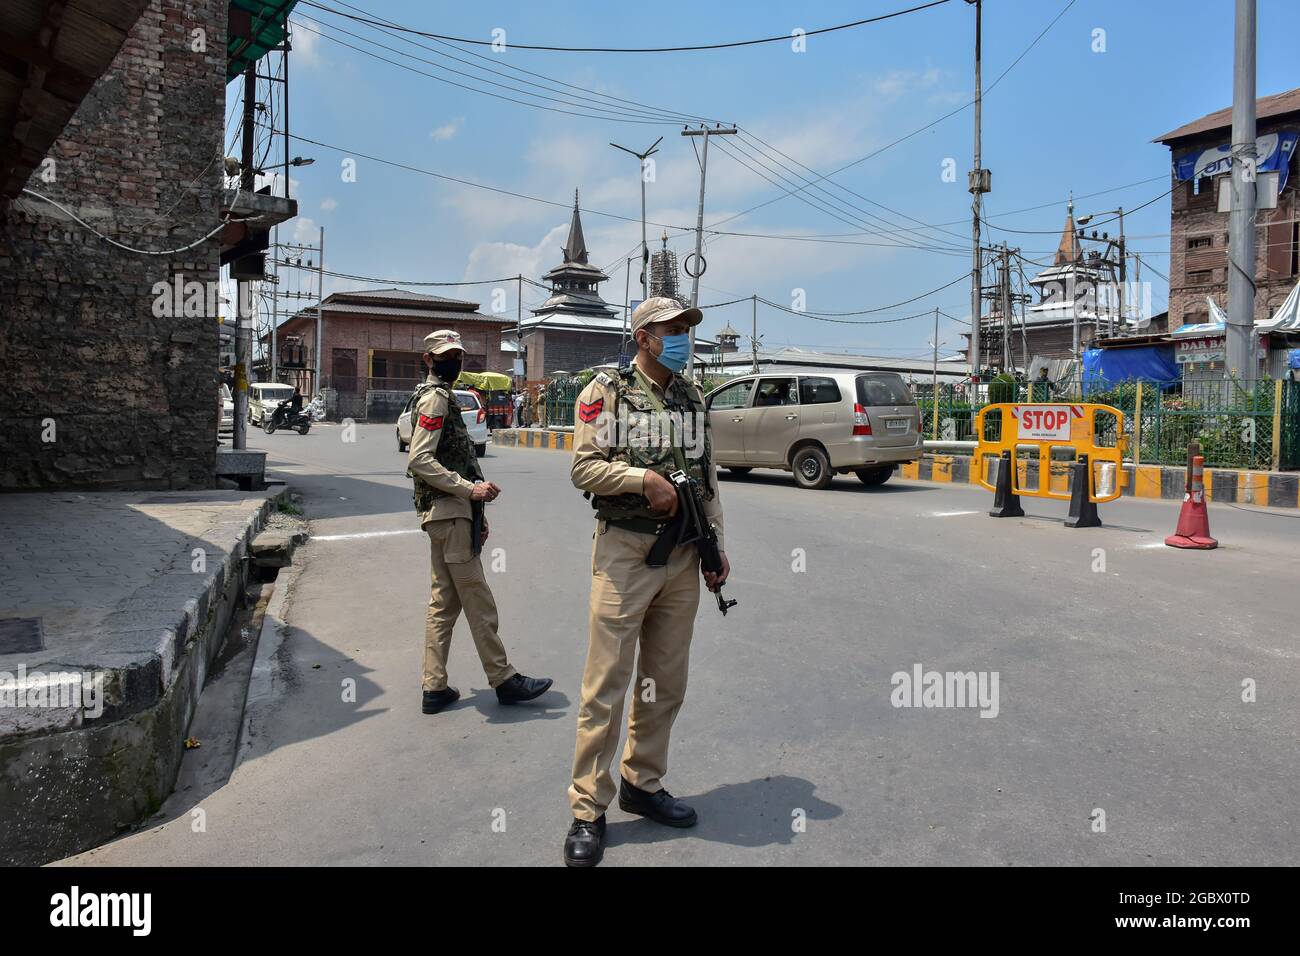 Sinagar, India. 05th Aug, 2021. Government forces stand alert after an explosion took place near the Grand Mosque on the second anniversary of the abrogation of autonomous status and statehood in Srinagar.An explosion took place near the Grand Mosque on Thursday, but no losses of life or injury were reported, officials said. They said the explosion, suspected to be an Improvised Explosive Device (IED), took place around noon. The explosion took place on the second anniversary of the abrogation of autonomous status and statehood. Credit: SOPA Images Limited/Alamy Live News Stock Photo